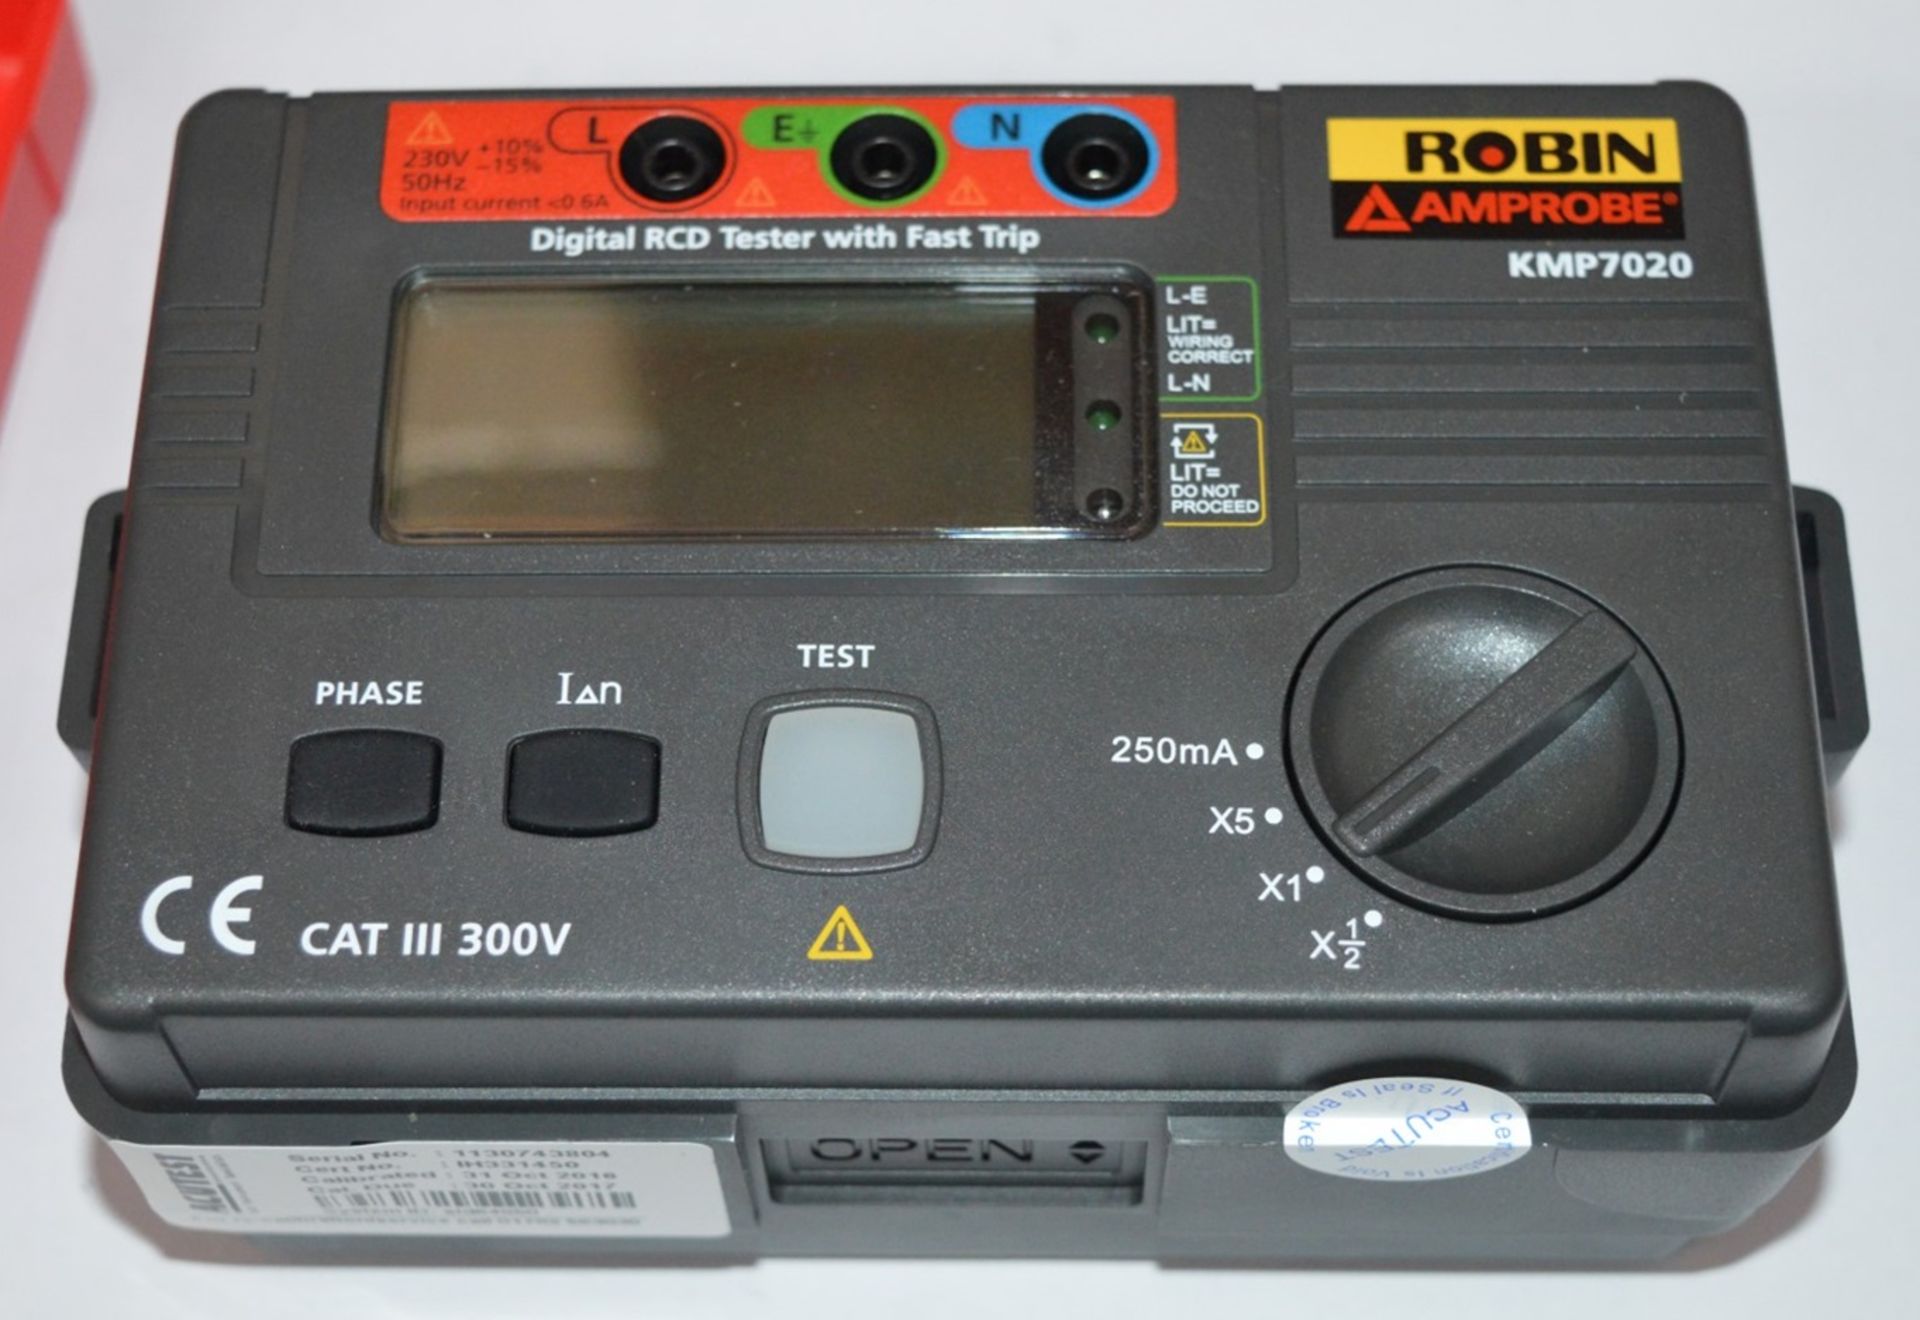 1 x Robin Amprobe Digital RCD Tester Wth Fast Trip - Model KMP7020 - Boxed With All Accessories - - Image 7 of 8